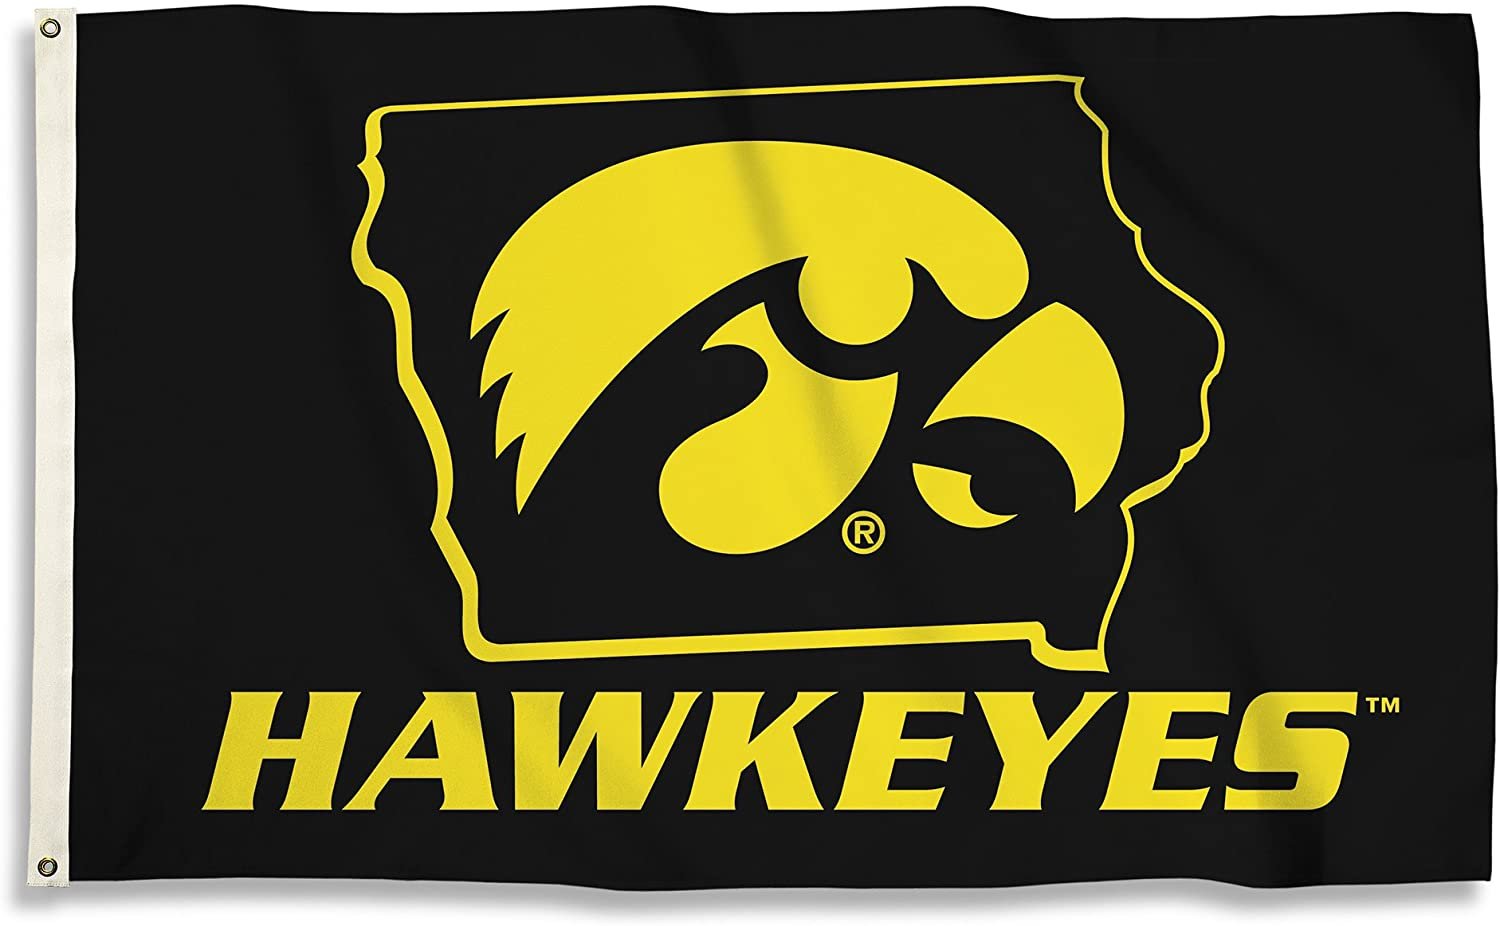 University of Iowa Hawkeyes Premium 3x5 Feet Flag Banner, State Design, Metal Grommets, Outdoor Use, Single Sided